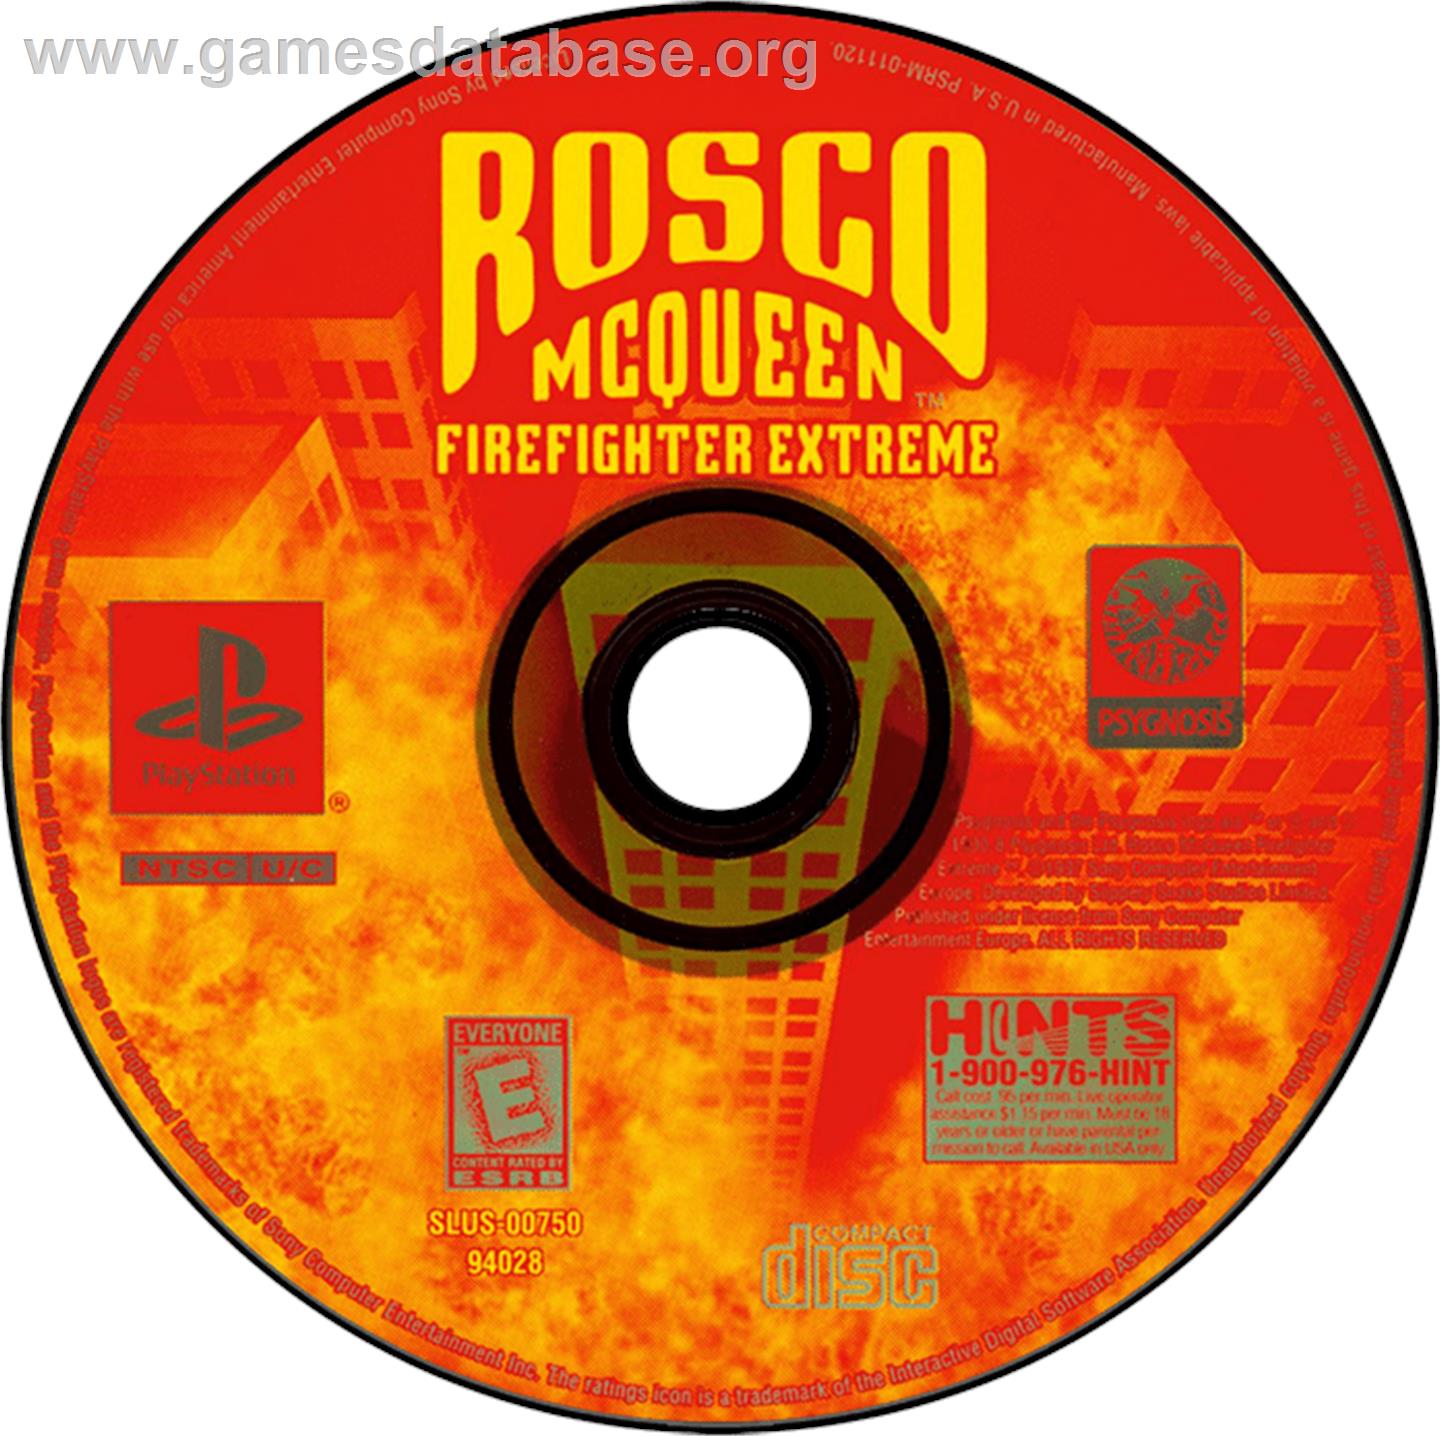 Rosco McQueen Firefighter Extreme - Sony Playstation - Artwork - Disc